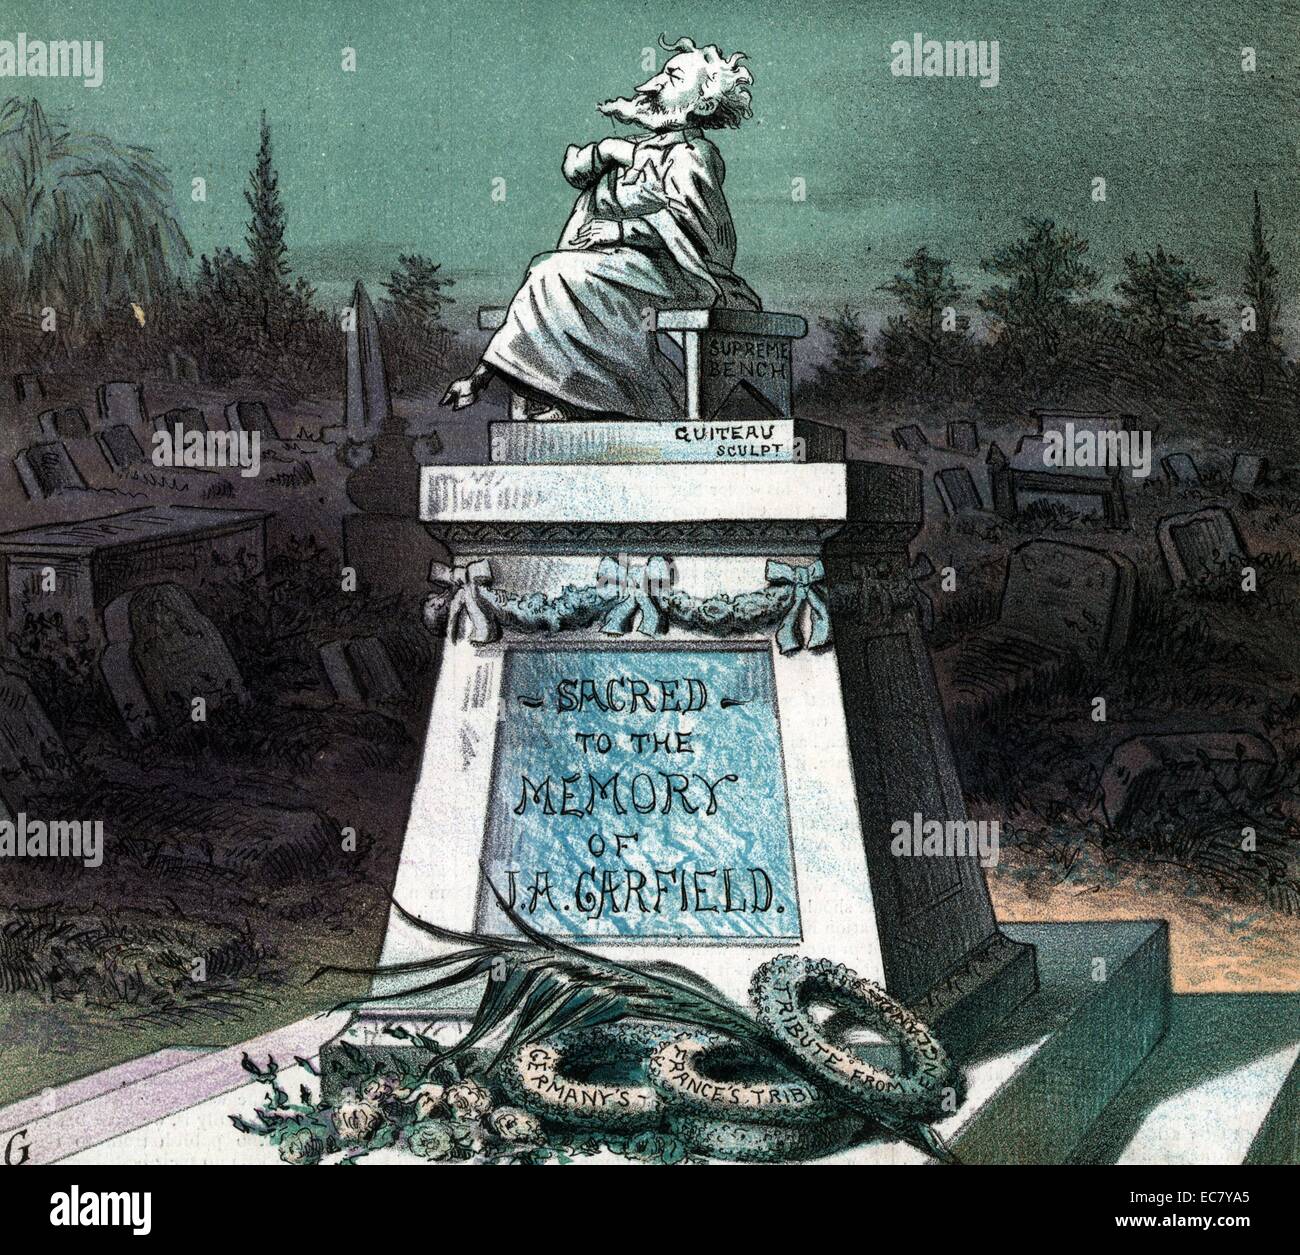 The living president's tribute to the dead president' Statue of Roscoe Conkling, with cloven hooves, seated on a bench labelled 'Supreme Bench' atop a monumental tomb labelled 'Sacred to the Memory of J.A. Garfield'; the monument is signed 'Guiteau sculpt.' Stock Photo